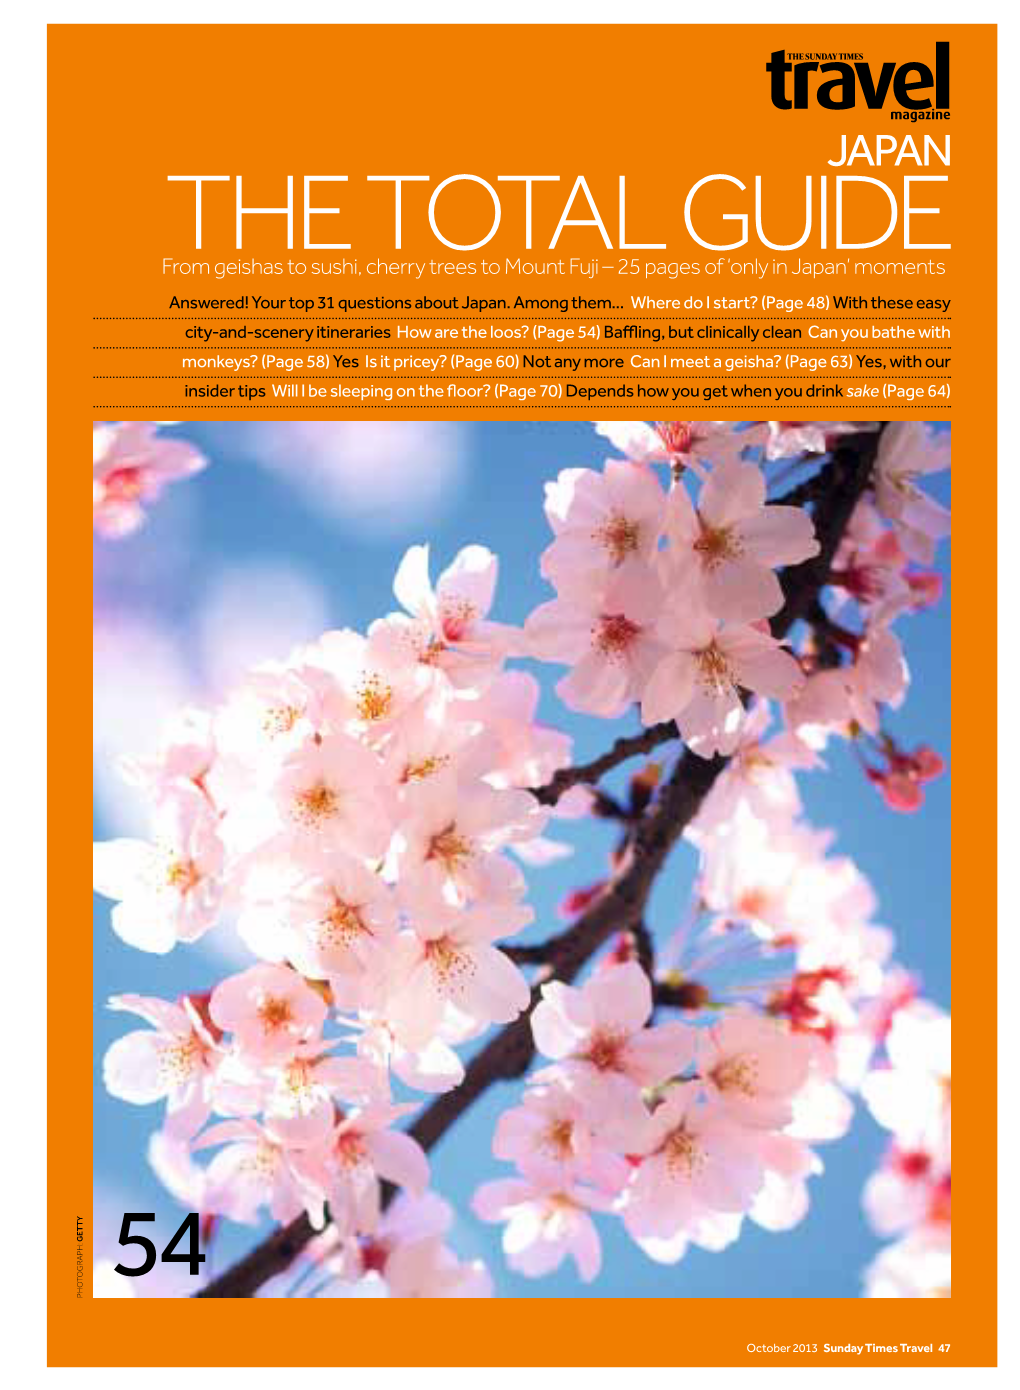 Sunday Times Travel 47 TOTAL GUIDE JAPAN